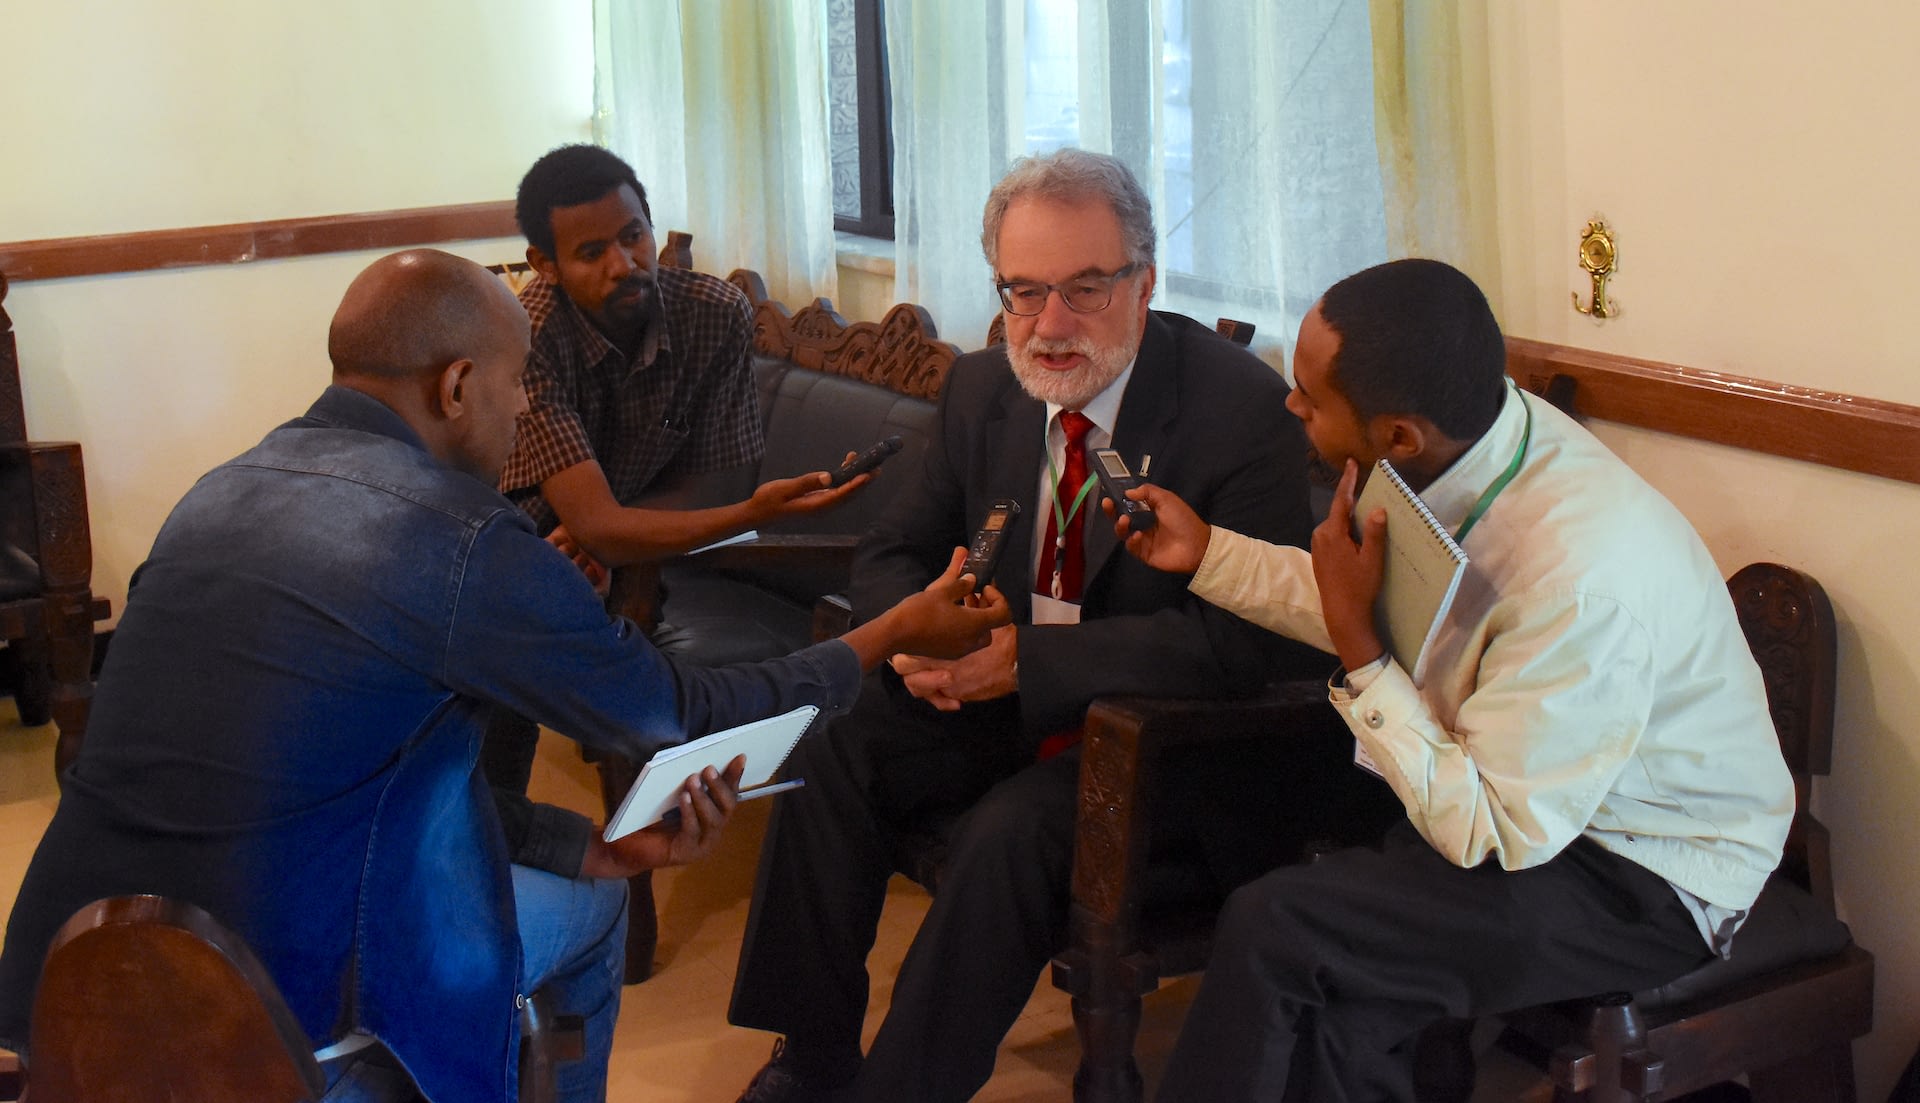 Hans Braun, Director of CIMMYT’s Global Wheat Program of CIMMYT, is interviewed by Ethiopian journalist at an event in 2017. (Photo: CIMMYT)